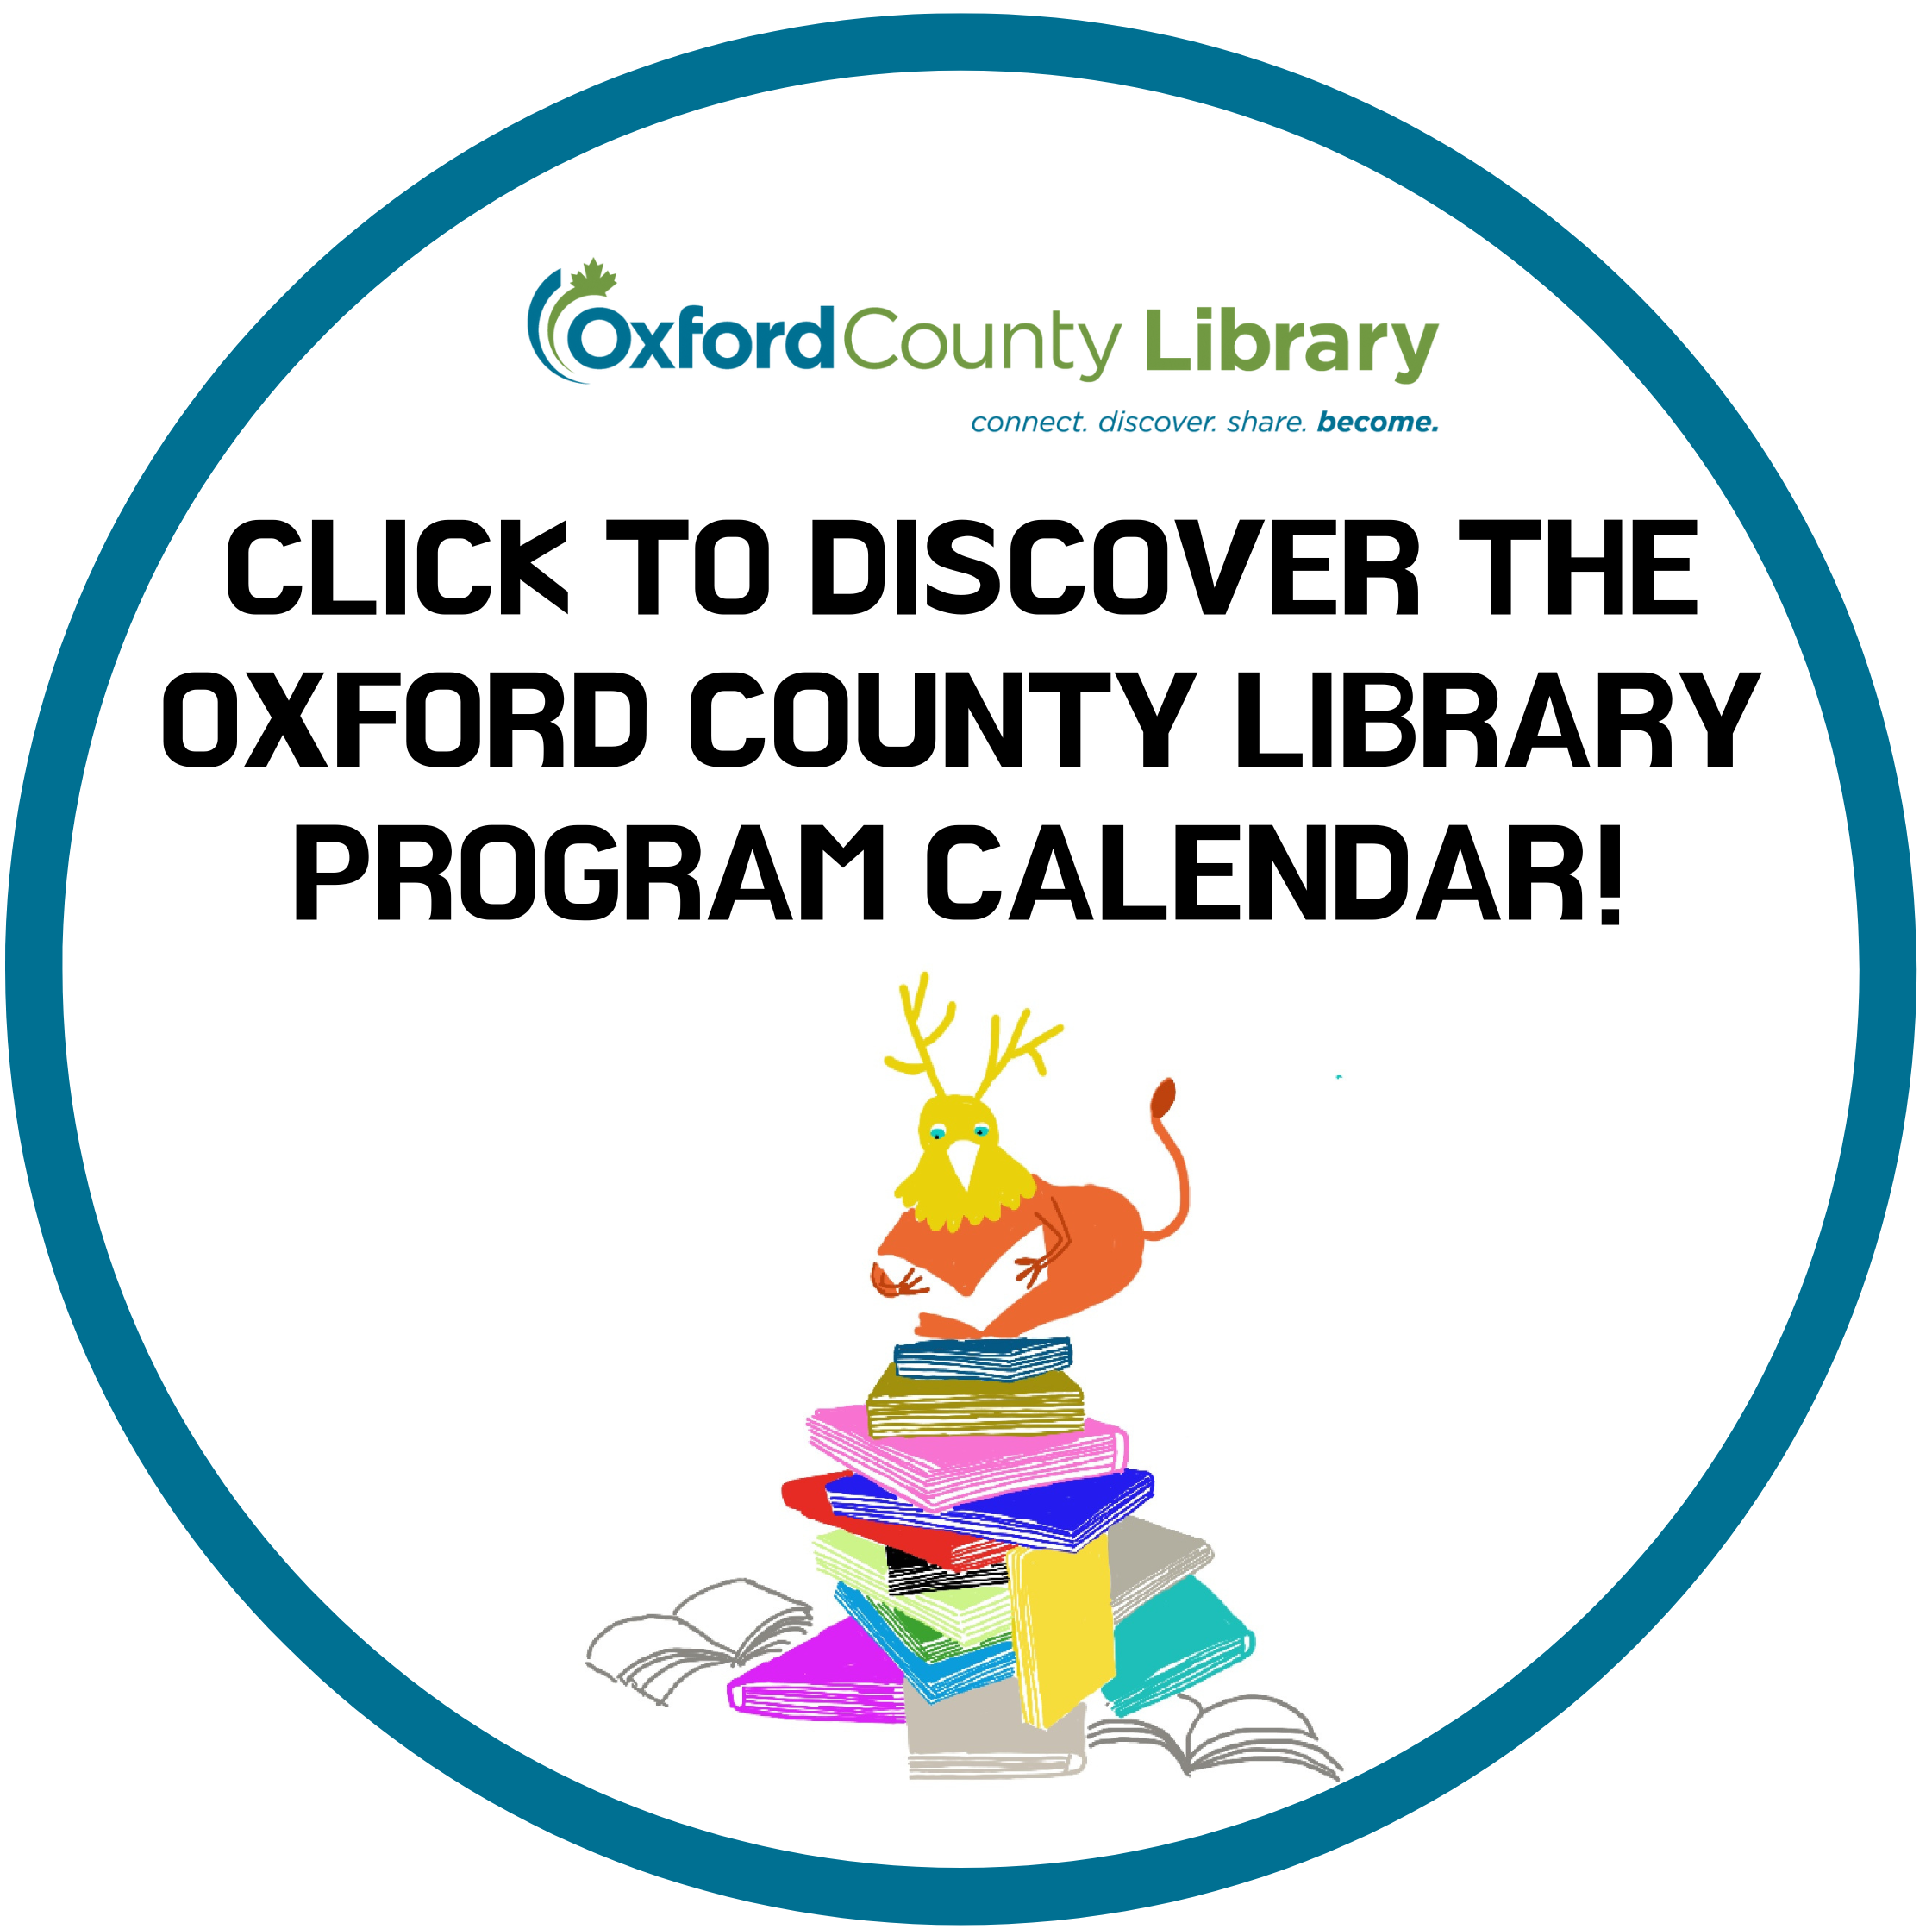 Click here to discover the Oxford County Library program calendar